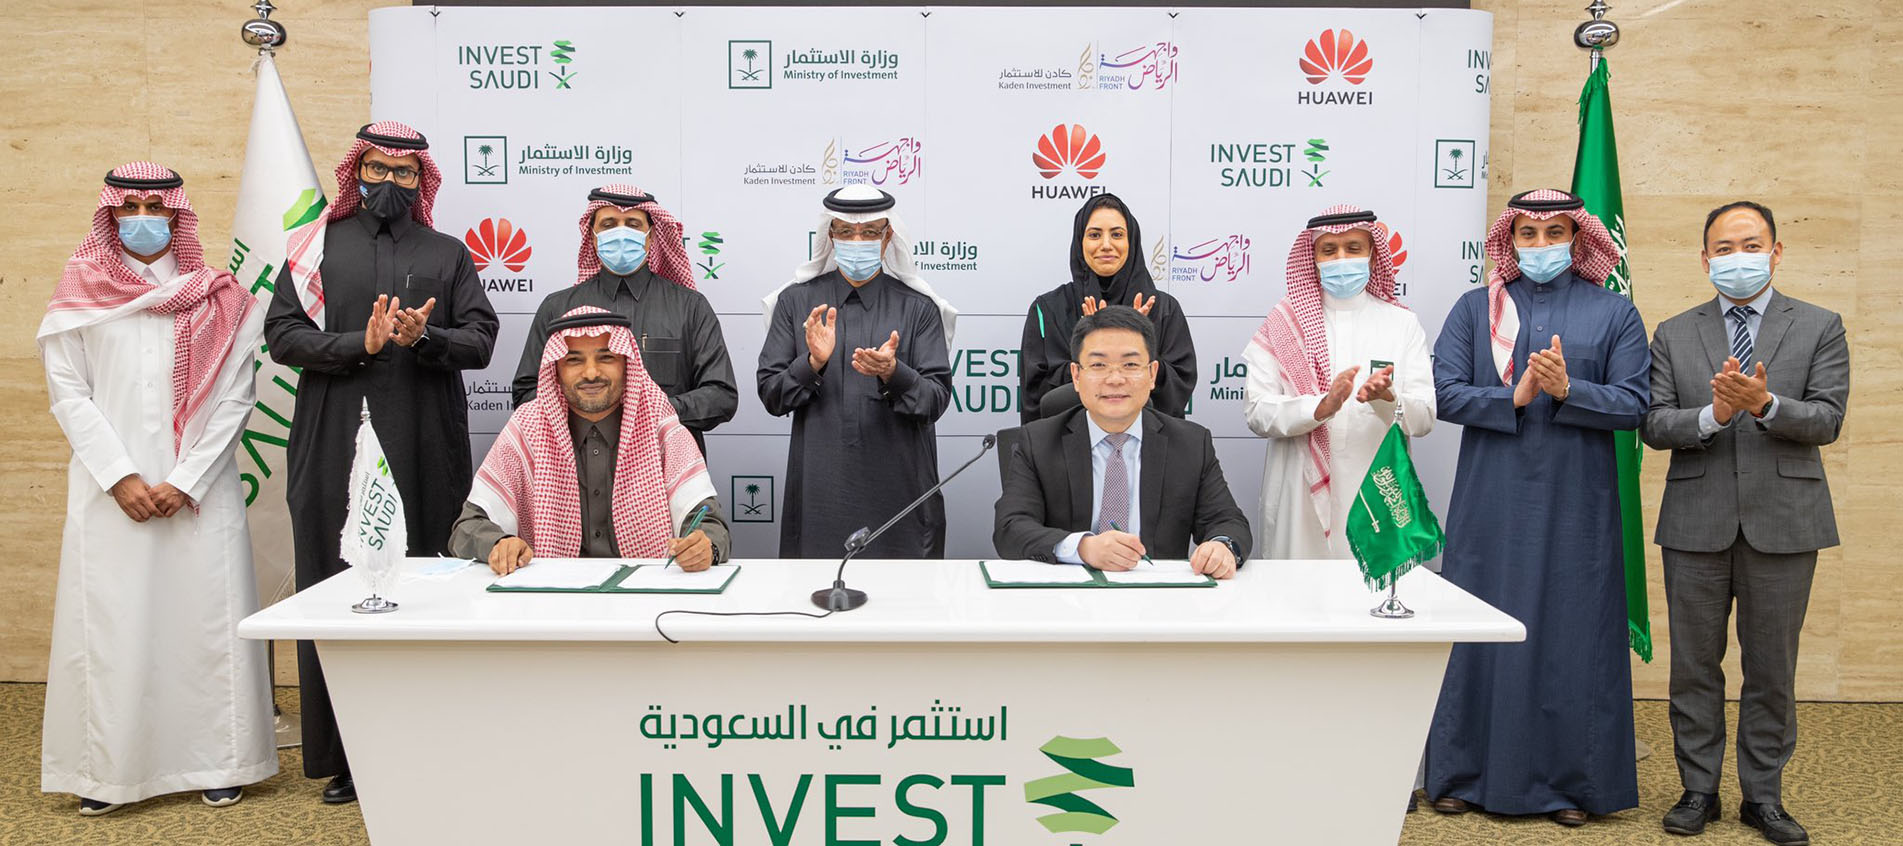 Kaden Signs an Agreement With Huawei  to Open the Largest Flagship Store Outside China in Riyadh Front In the Presence of Eng. Khalid AlFalih, Minister of Investment